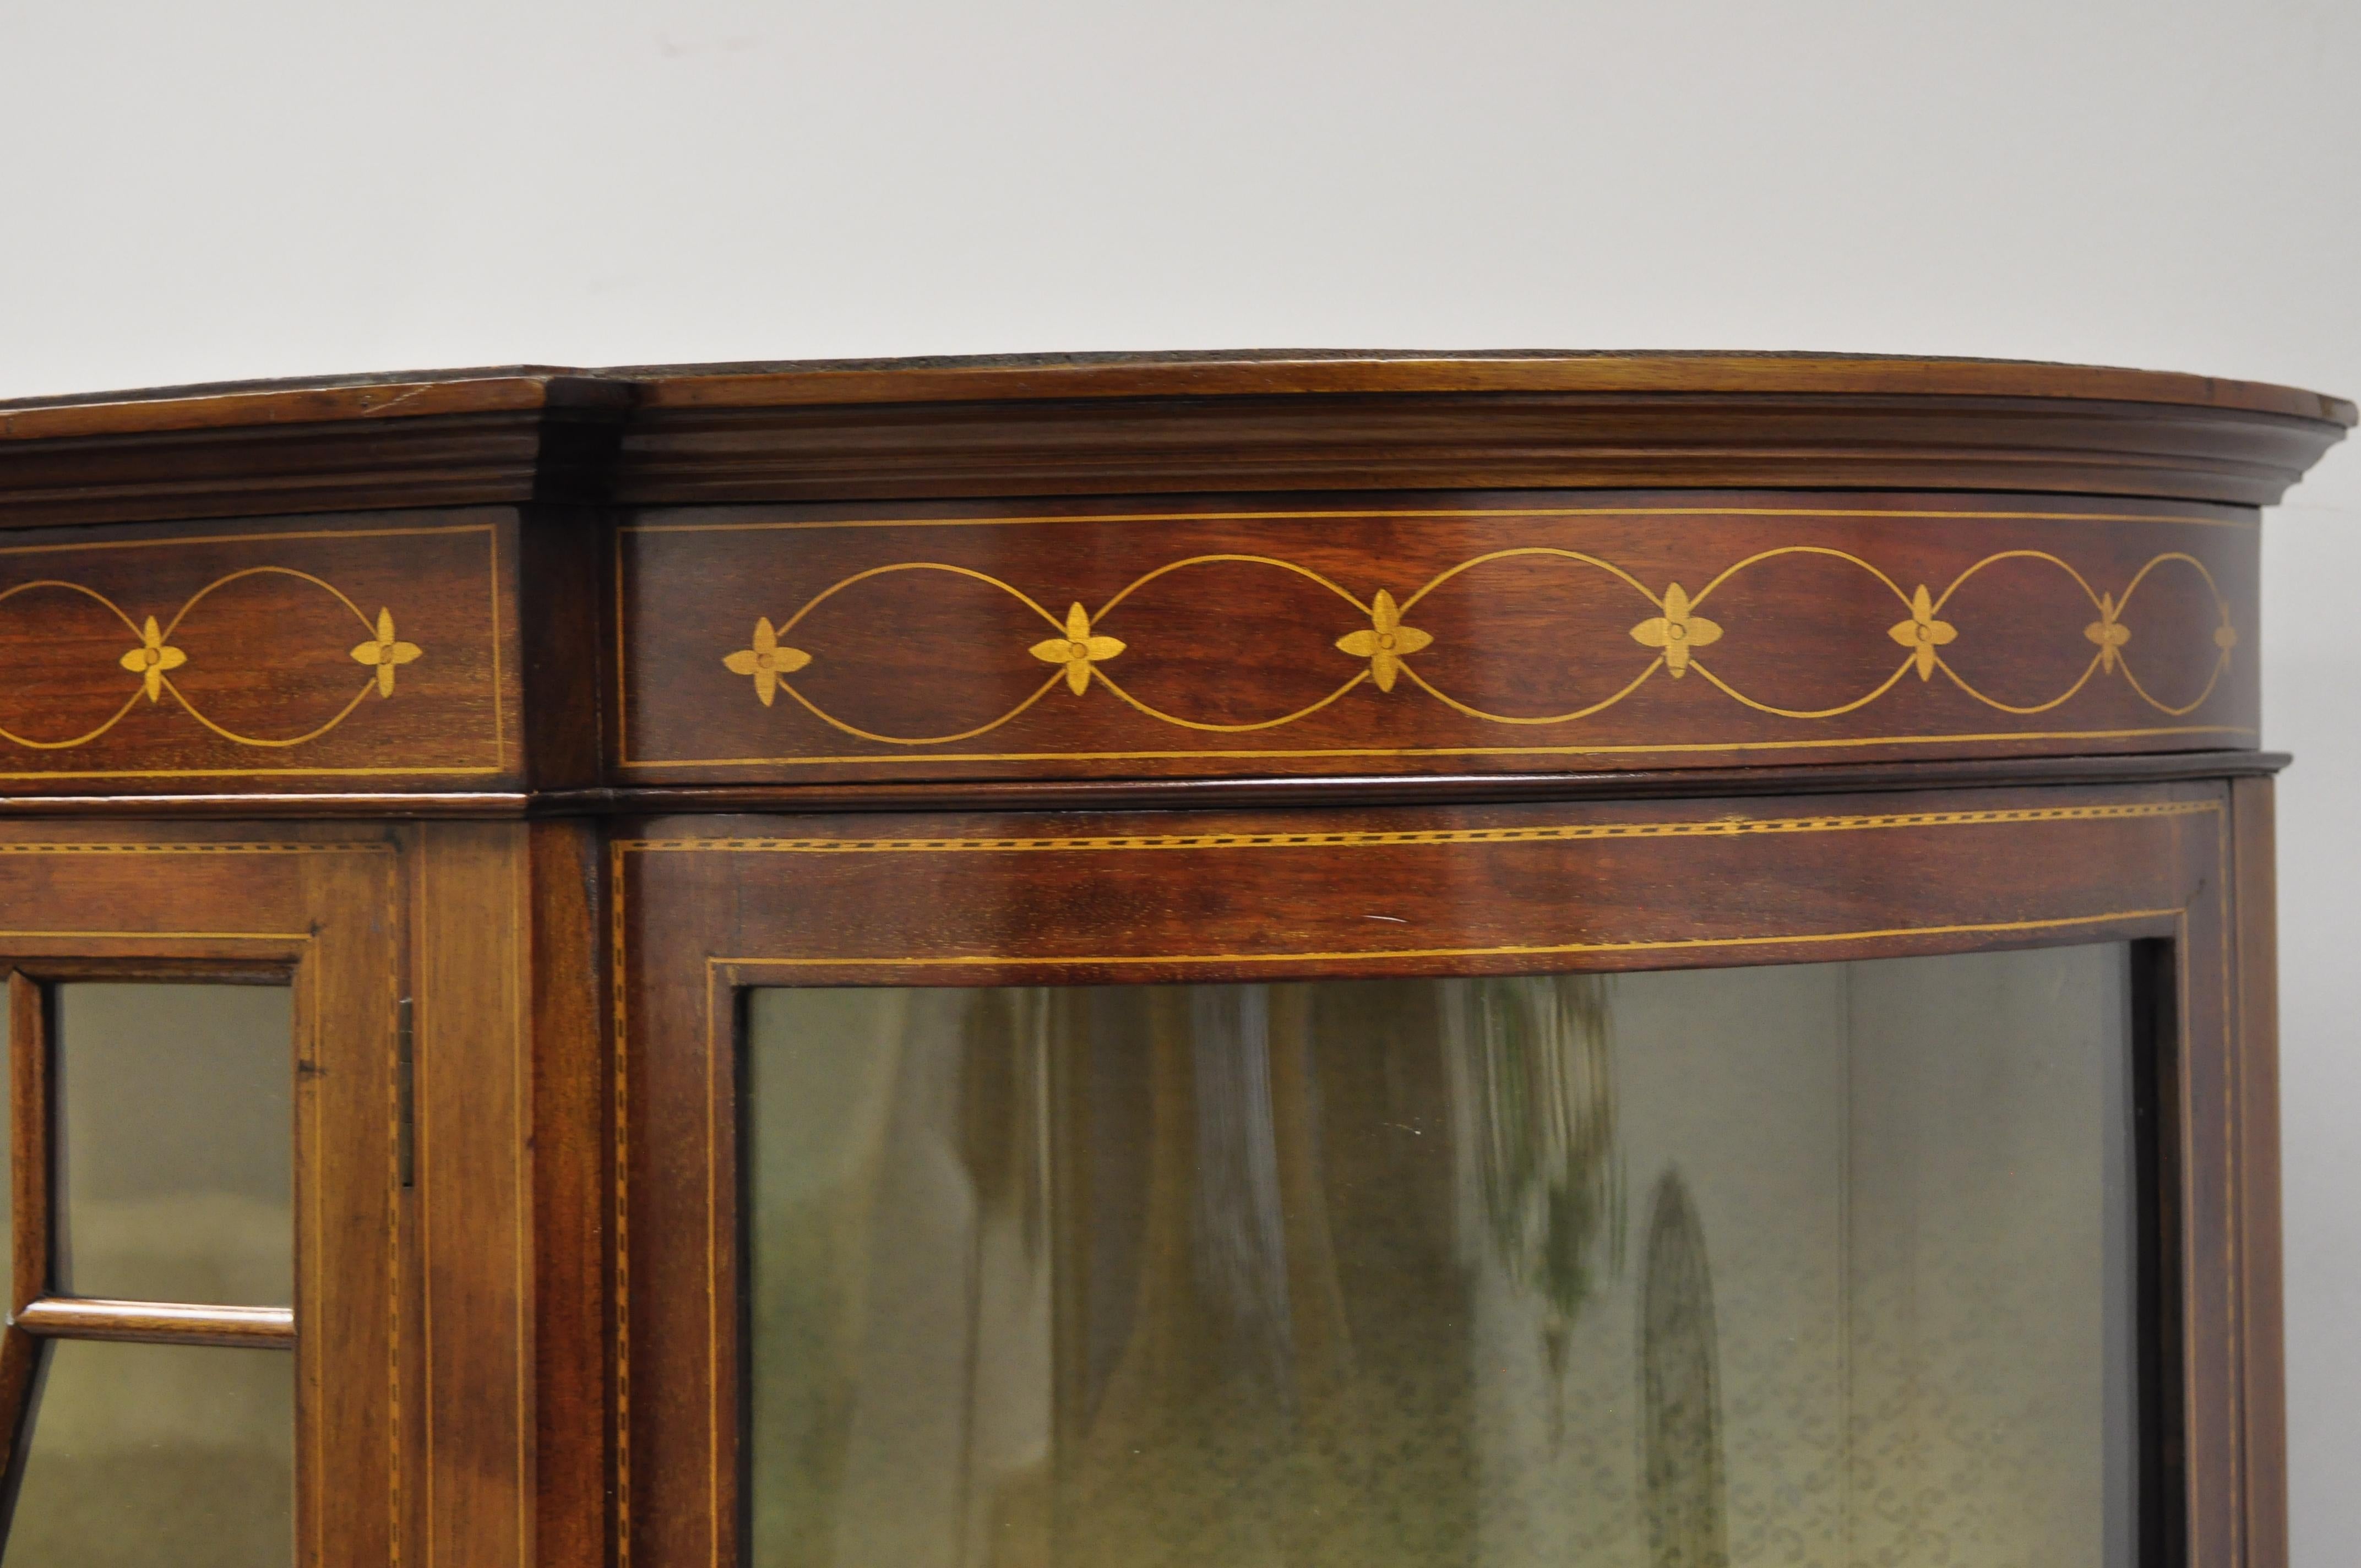 English Edwardian Satinwood Inlay Bowed Curved Glass China Display Cabinet Curio For Sale 2